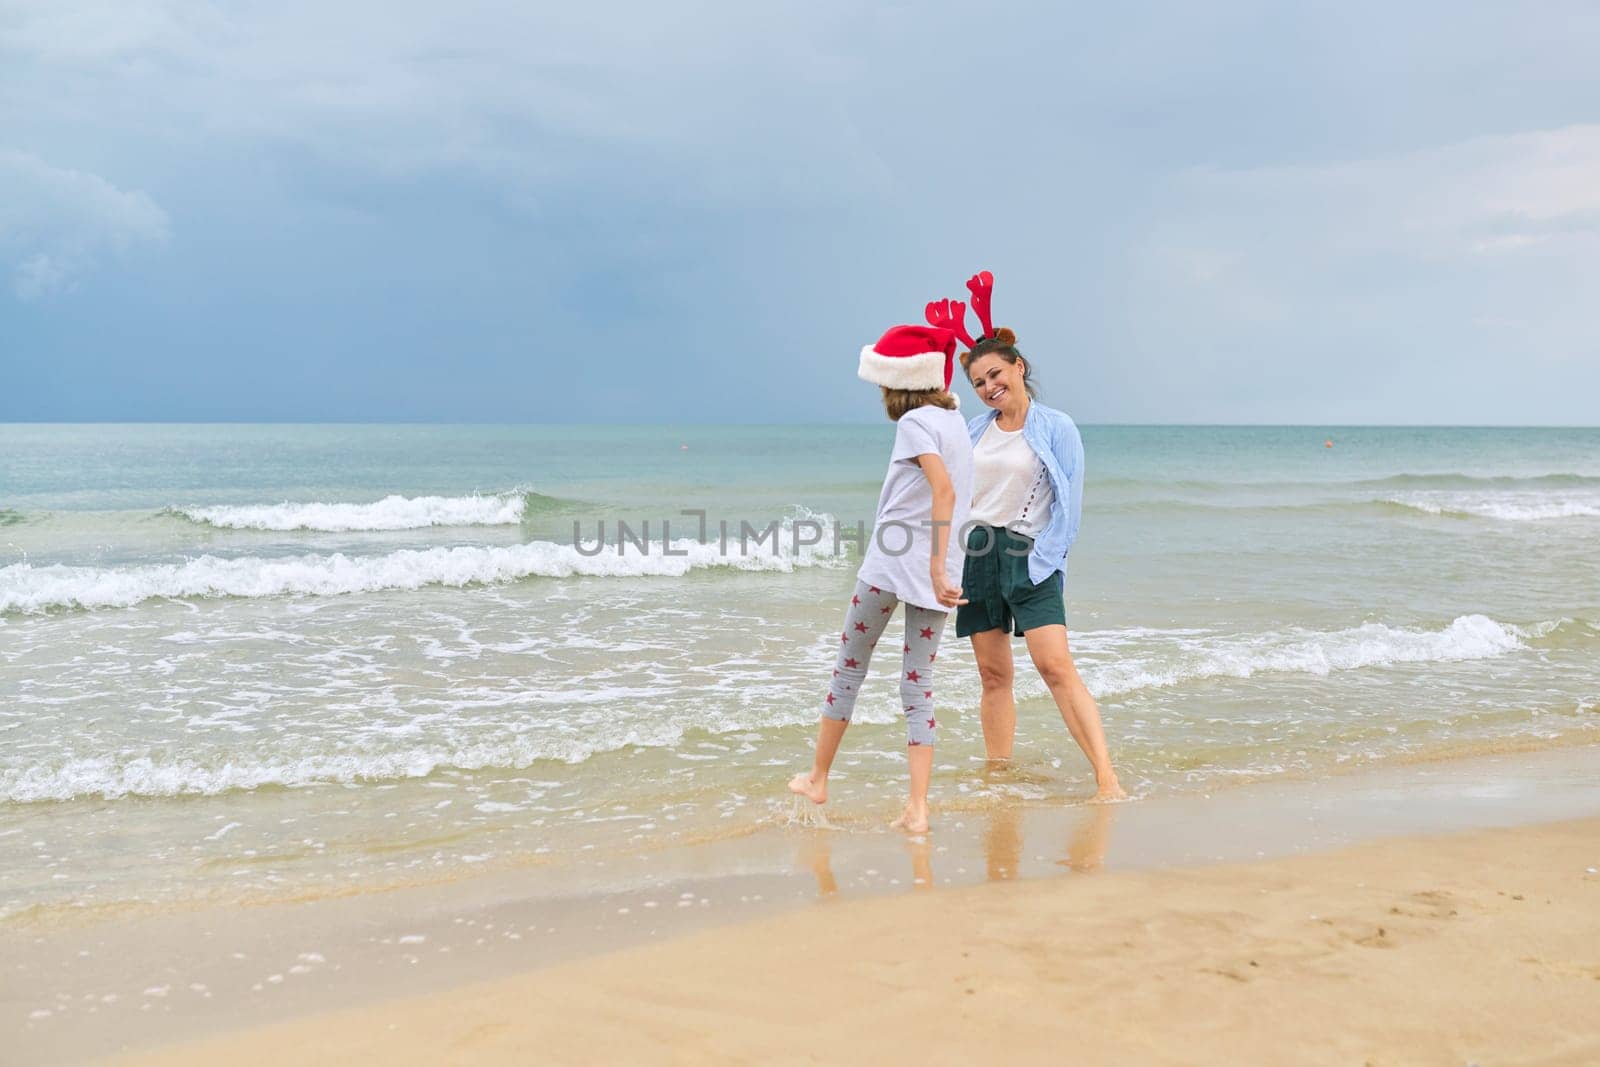 Background sea ocean beach, mom and daughter child having fun celebrating Christmas and New Year at tropical resort, copy space, vacations family travel tourism concept